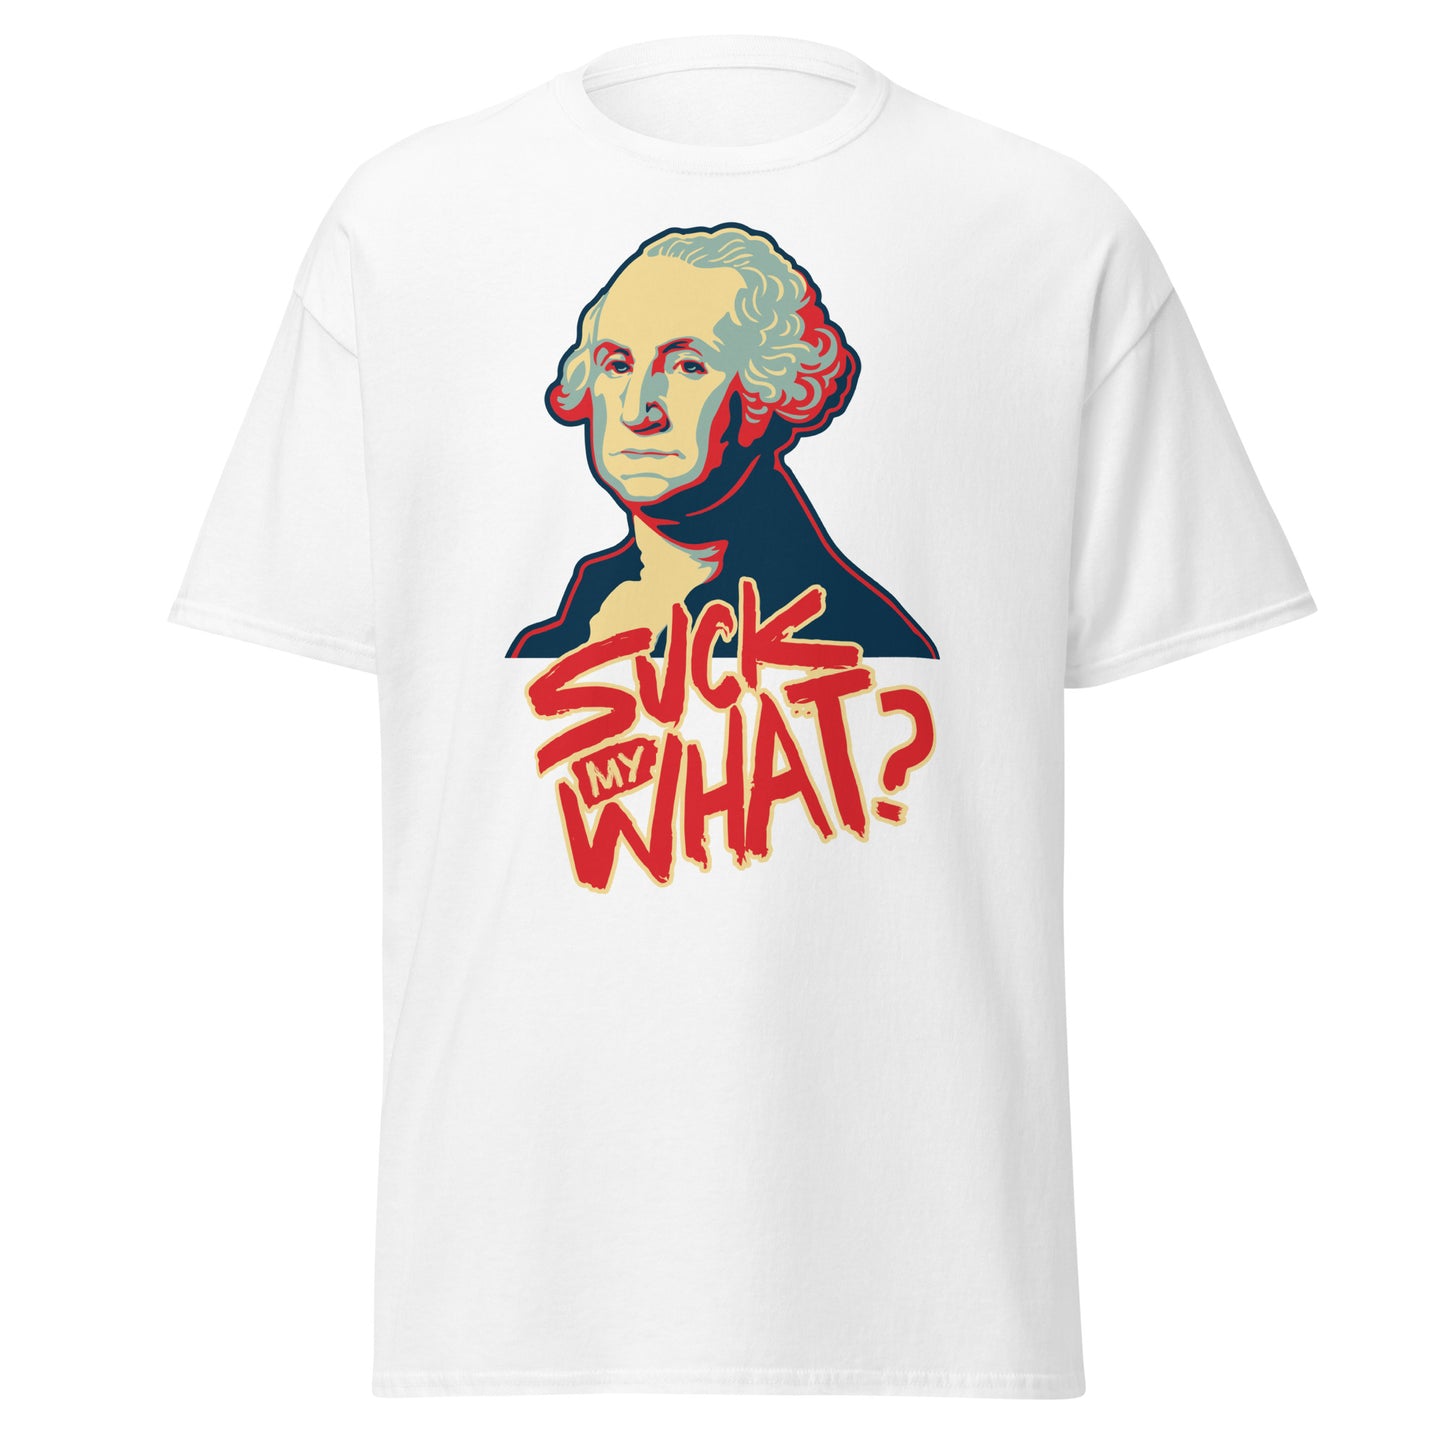 The Revolutionary - Suck My What White with Red T-Shirt - George Washington, Independence Day, 4th of July, USA Tee Shirt